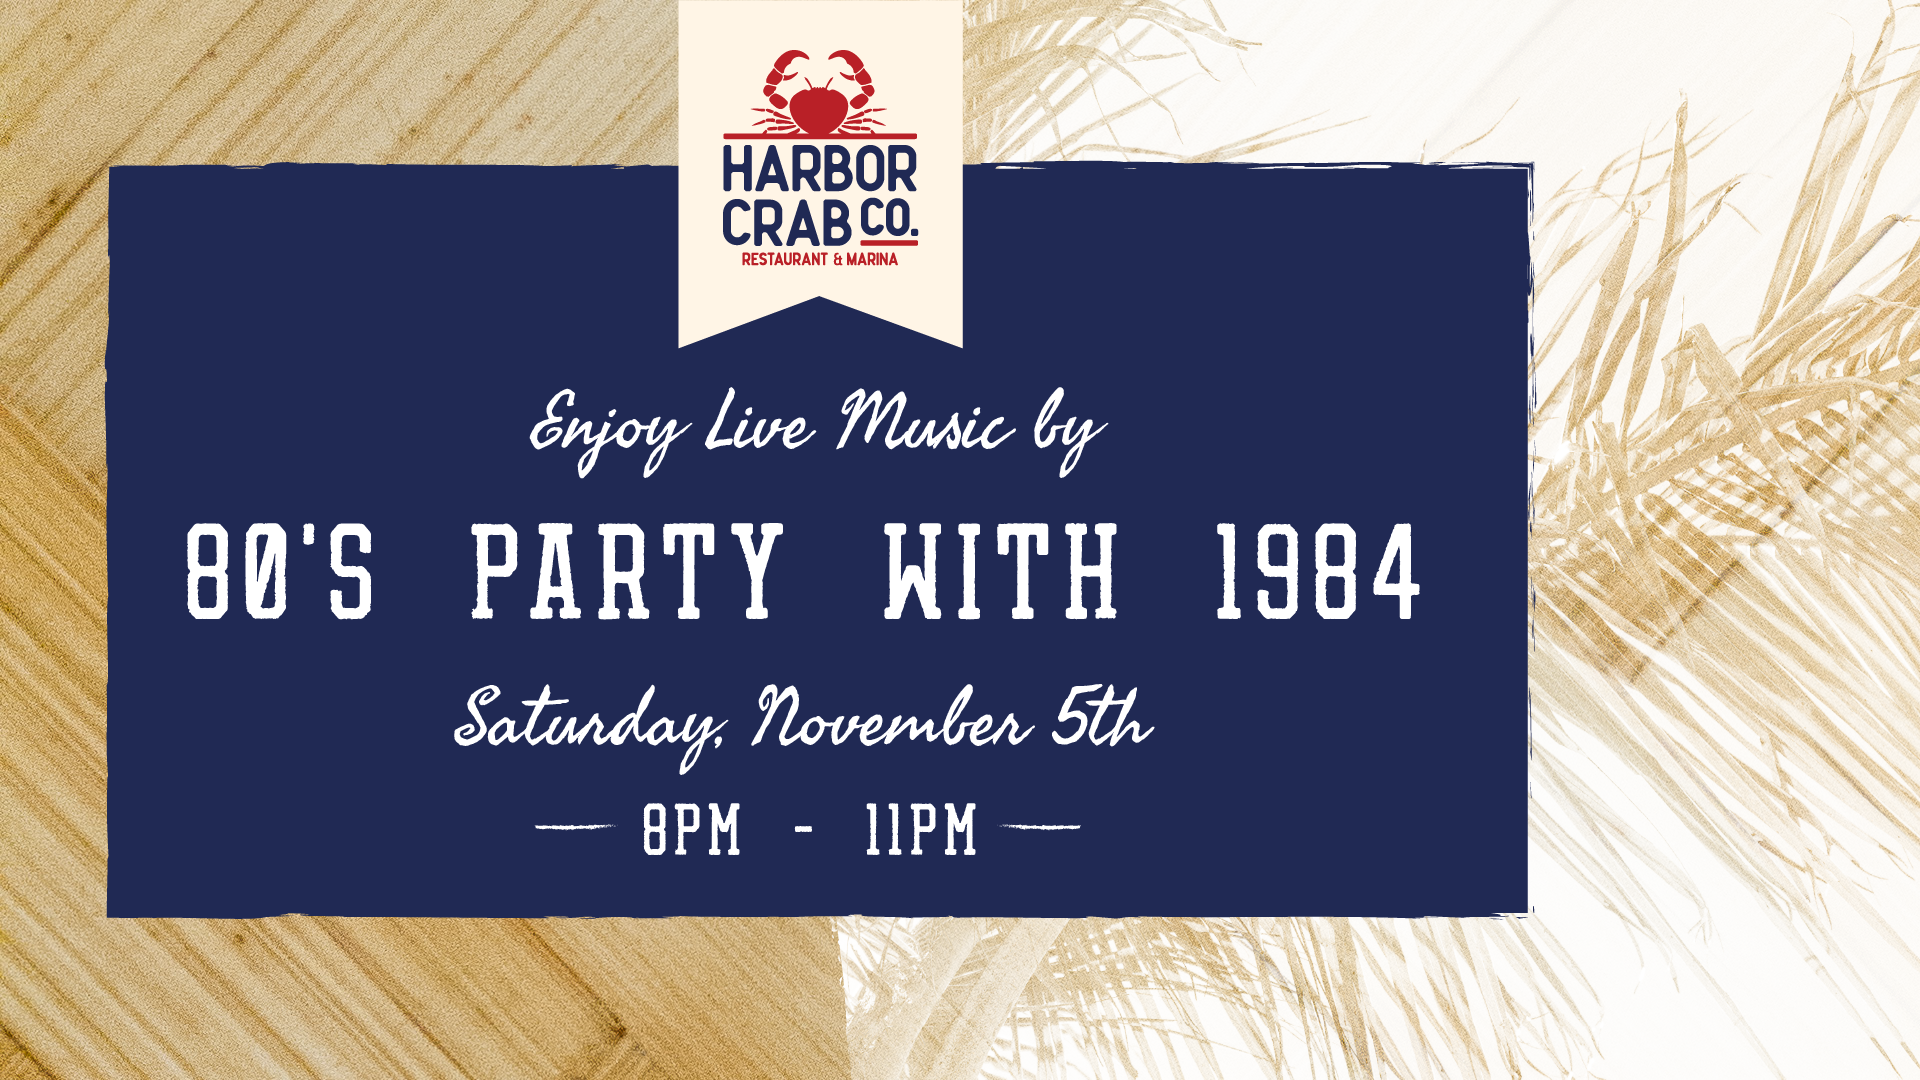 80s Party Flyer for Saturday, November 5th at Harbor Crab